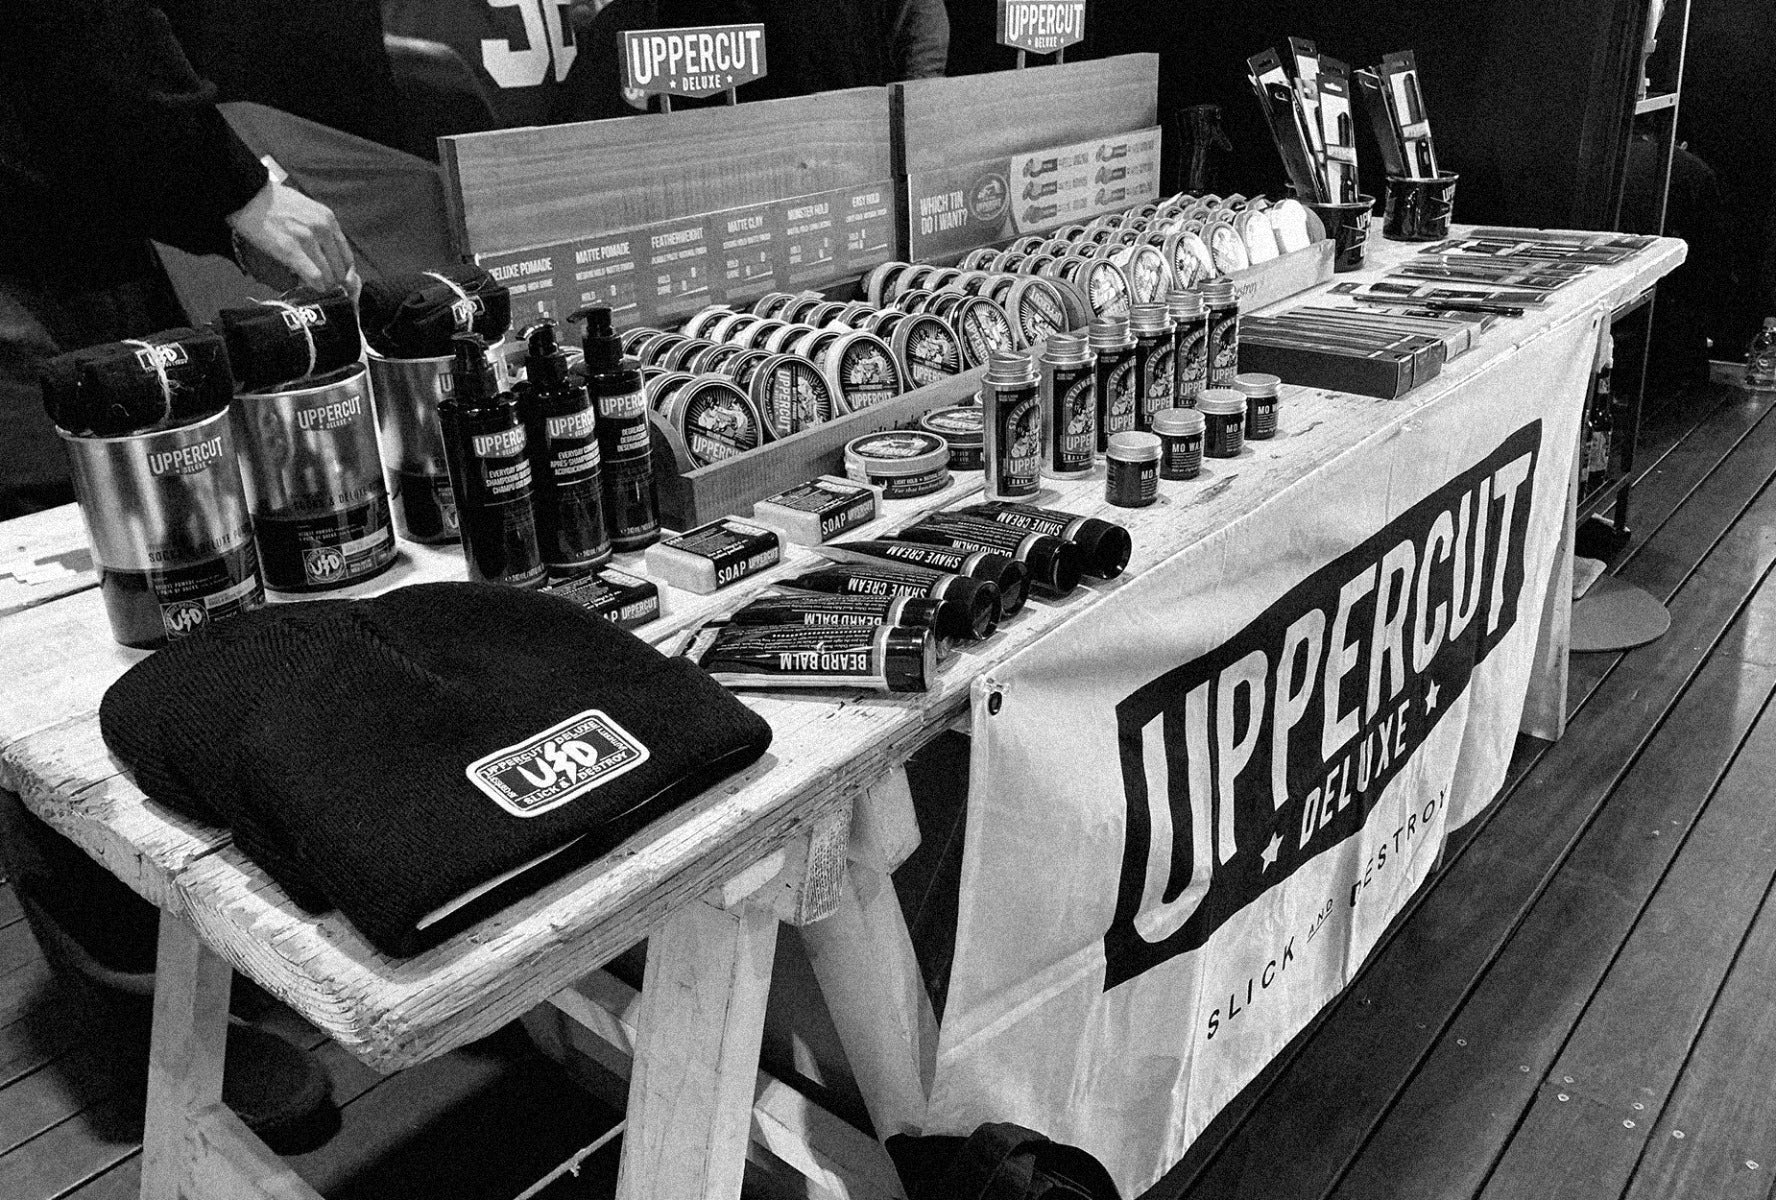 Uppercut Deluxe products